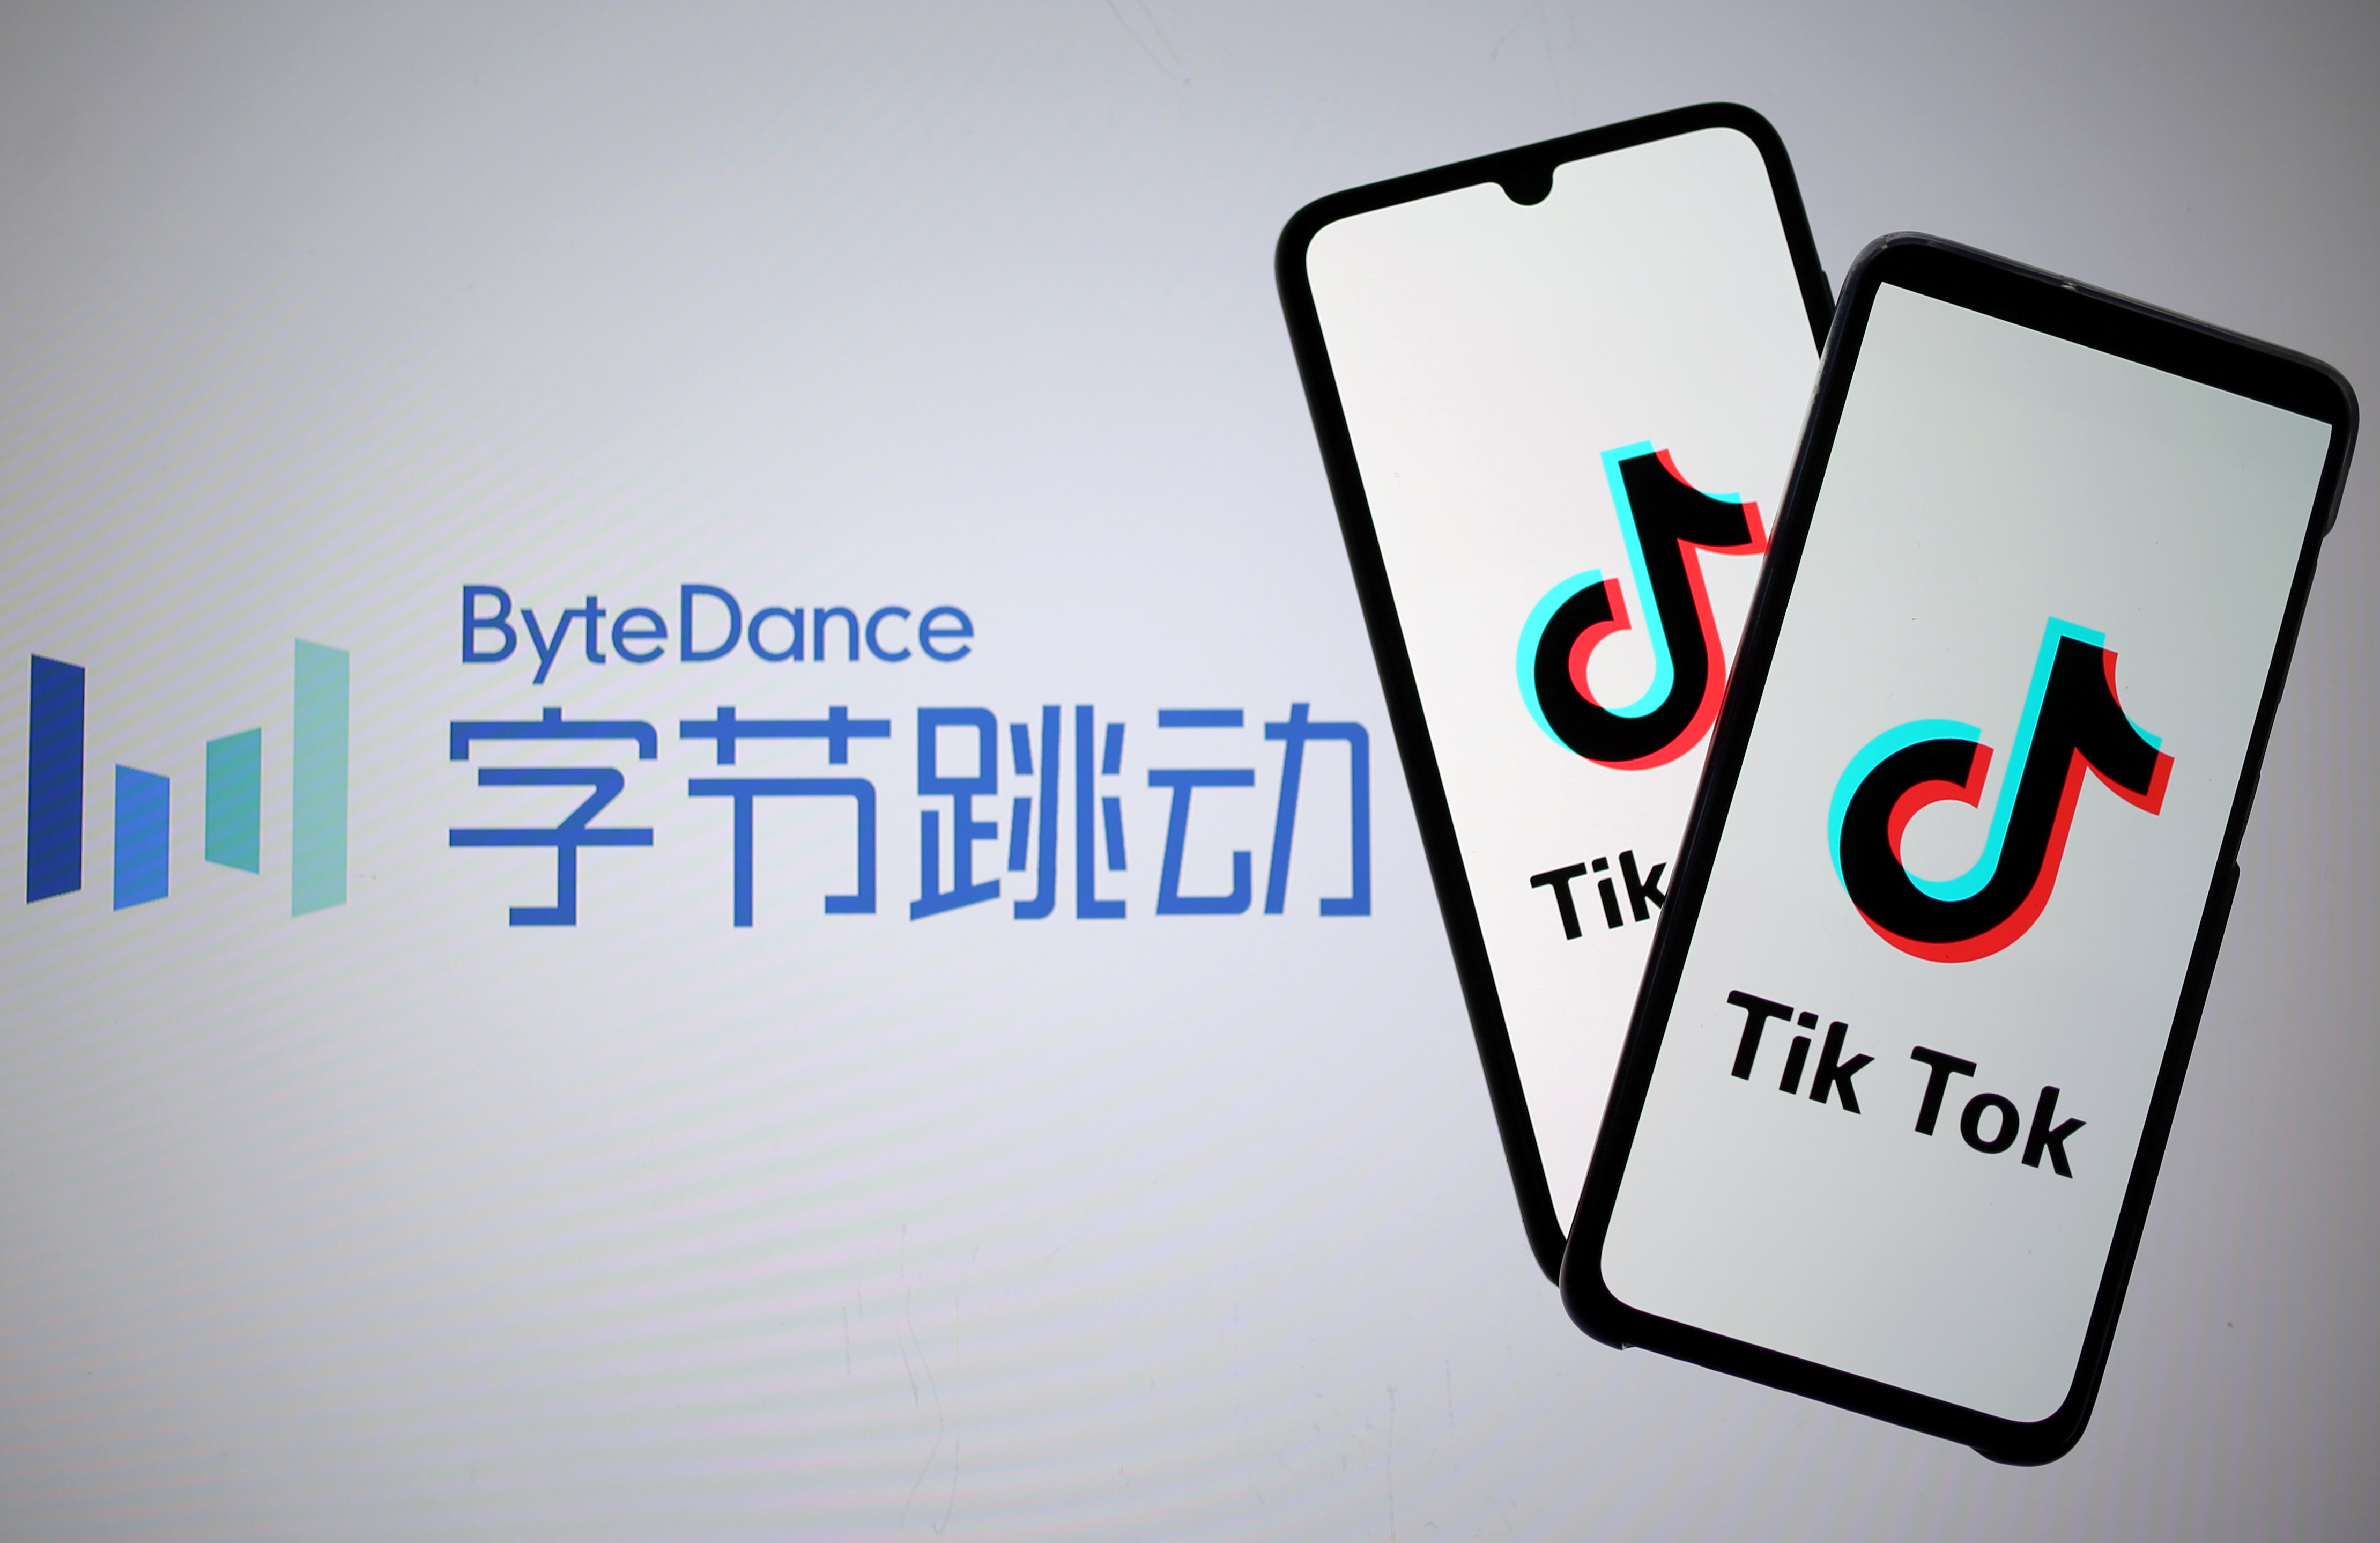 Tik Tok logos are seen on smartphones in front of displayed ByteDance logo in this illustration